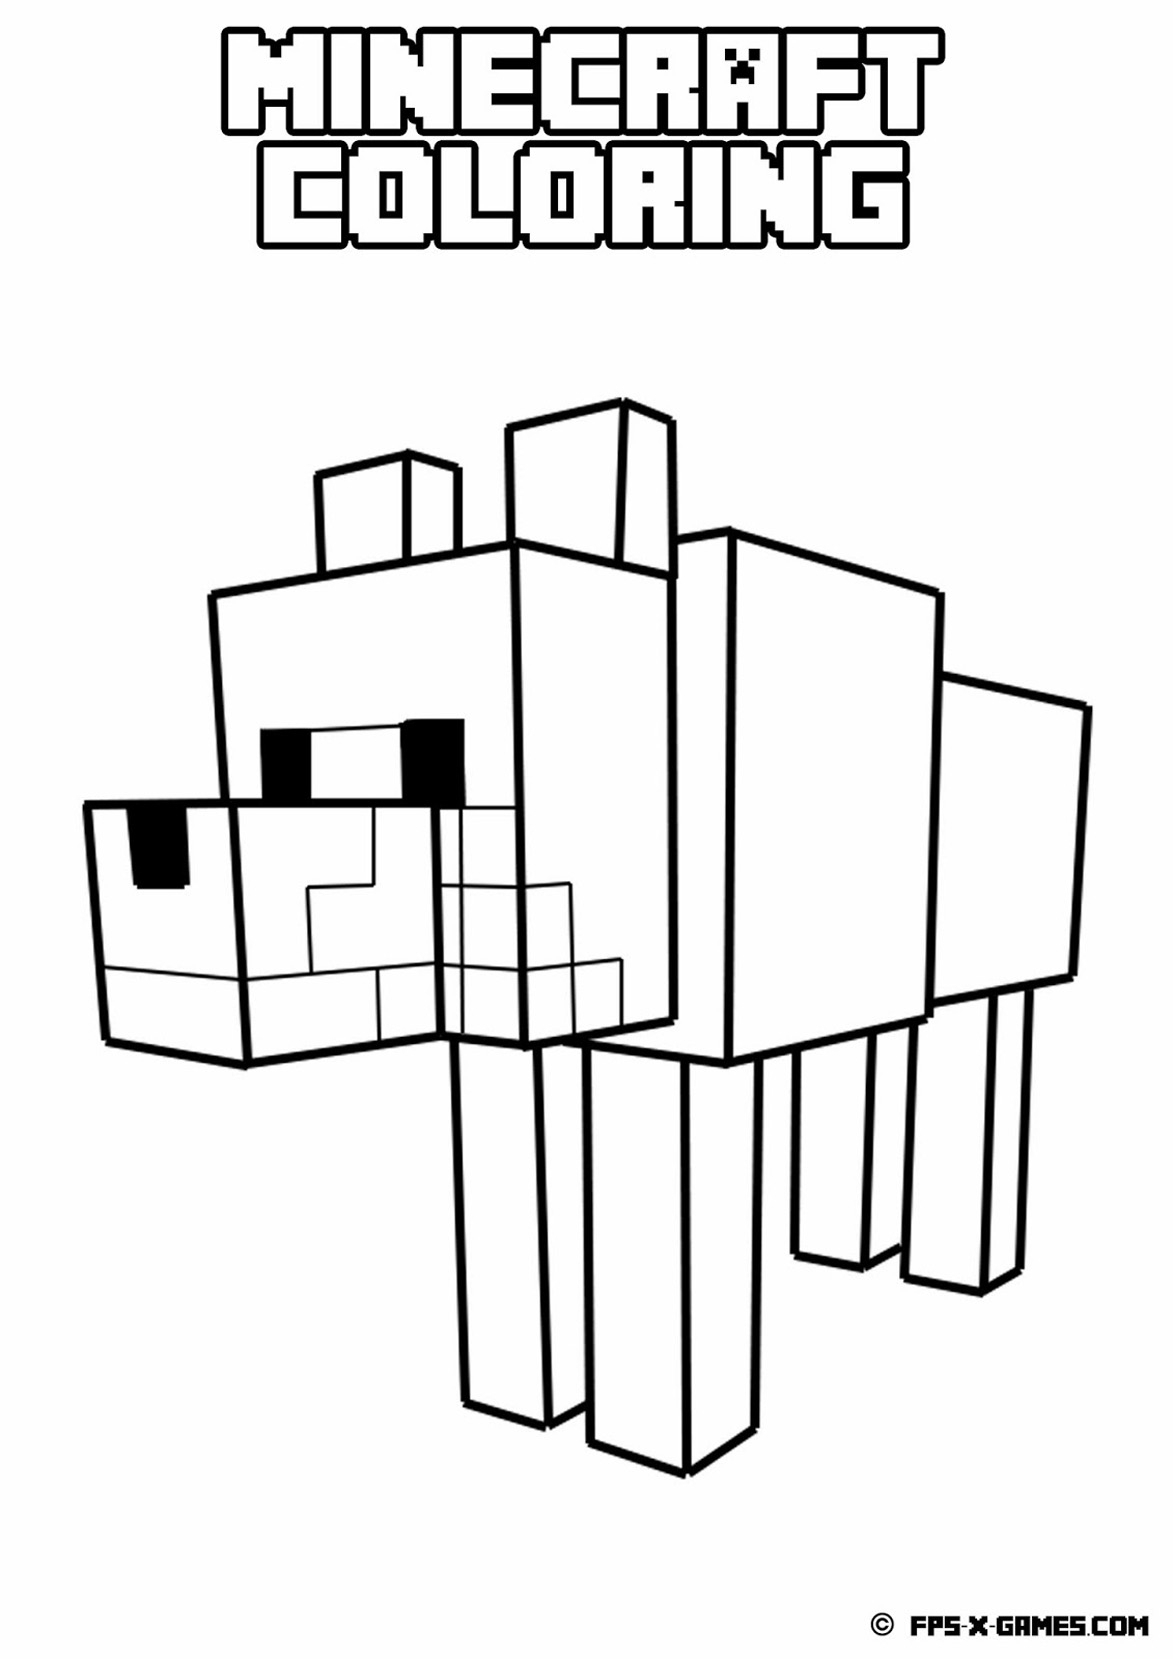 Herobrine Coloring Pages Free Minecraft Coloring Pages For Kids Printable Coloring Page For